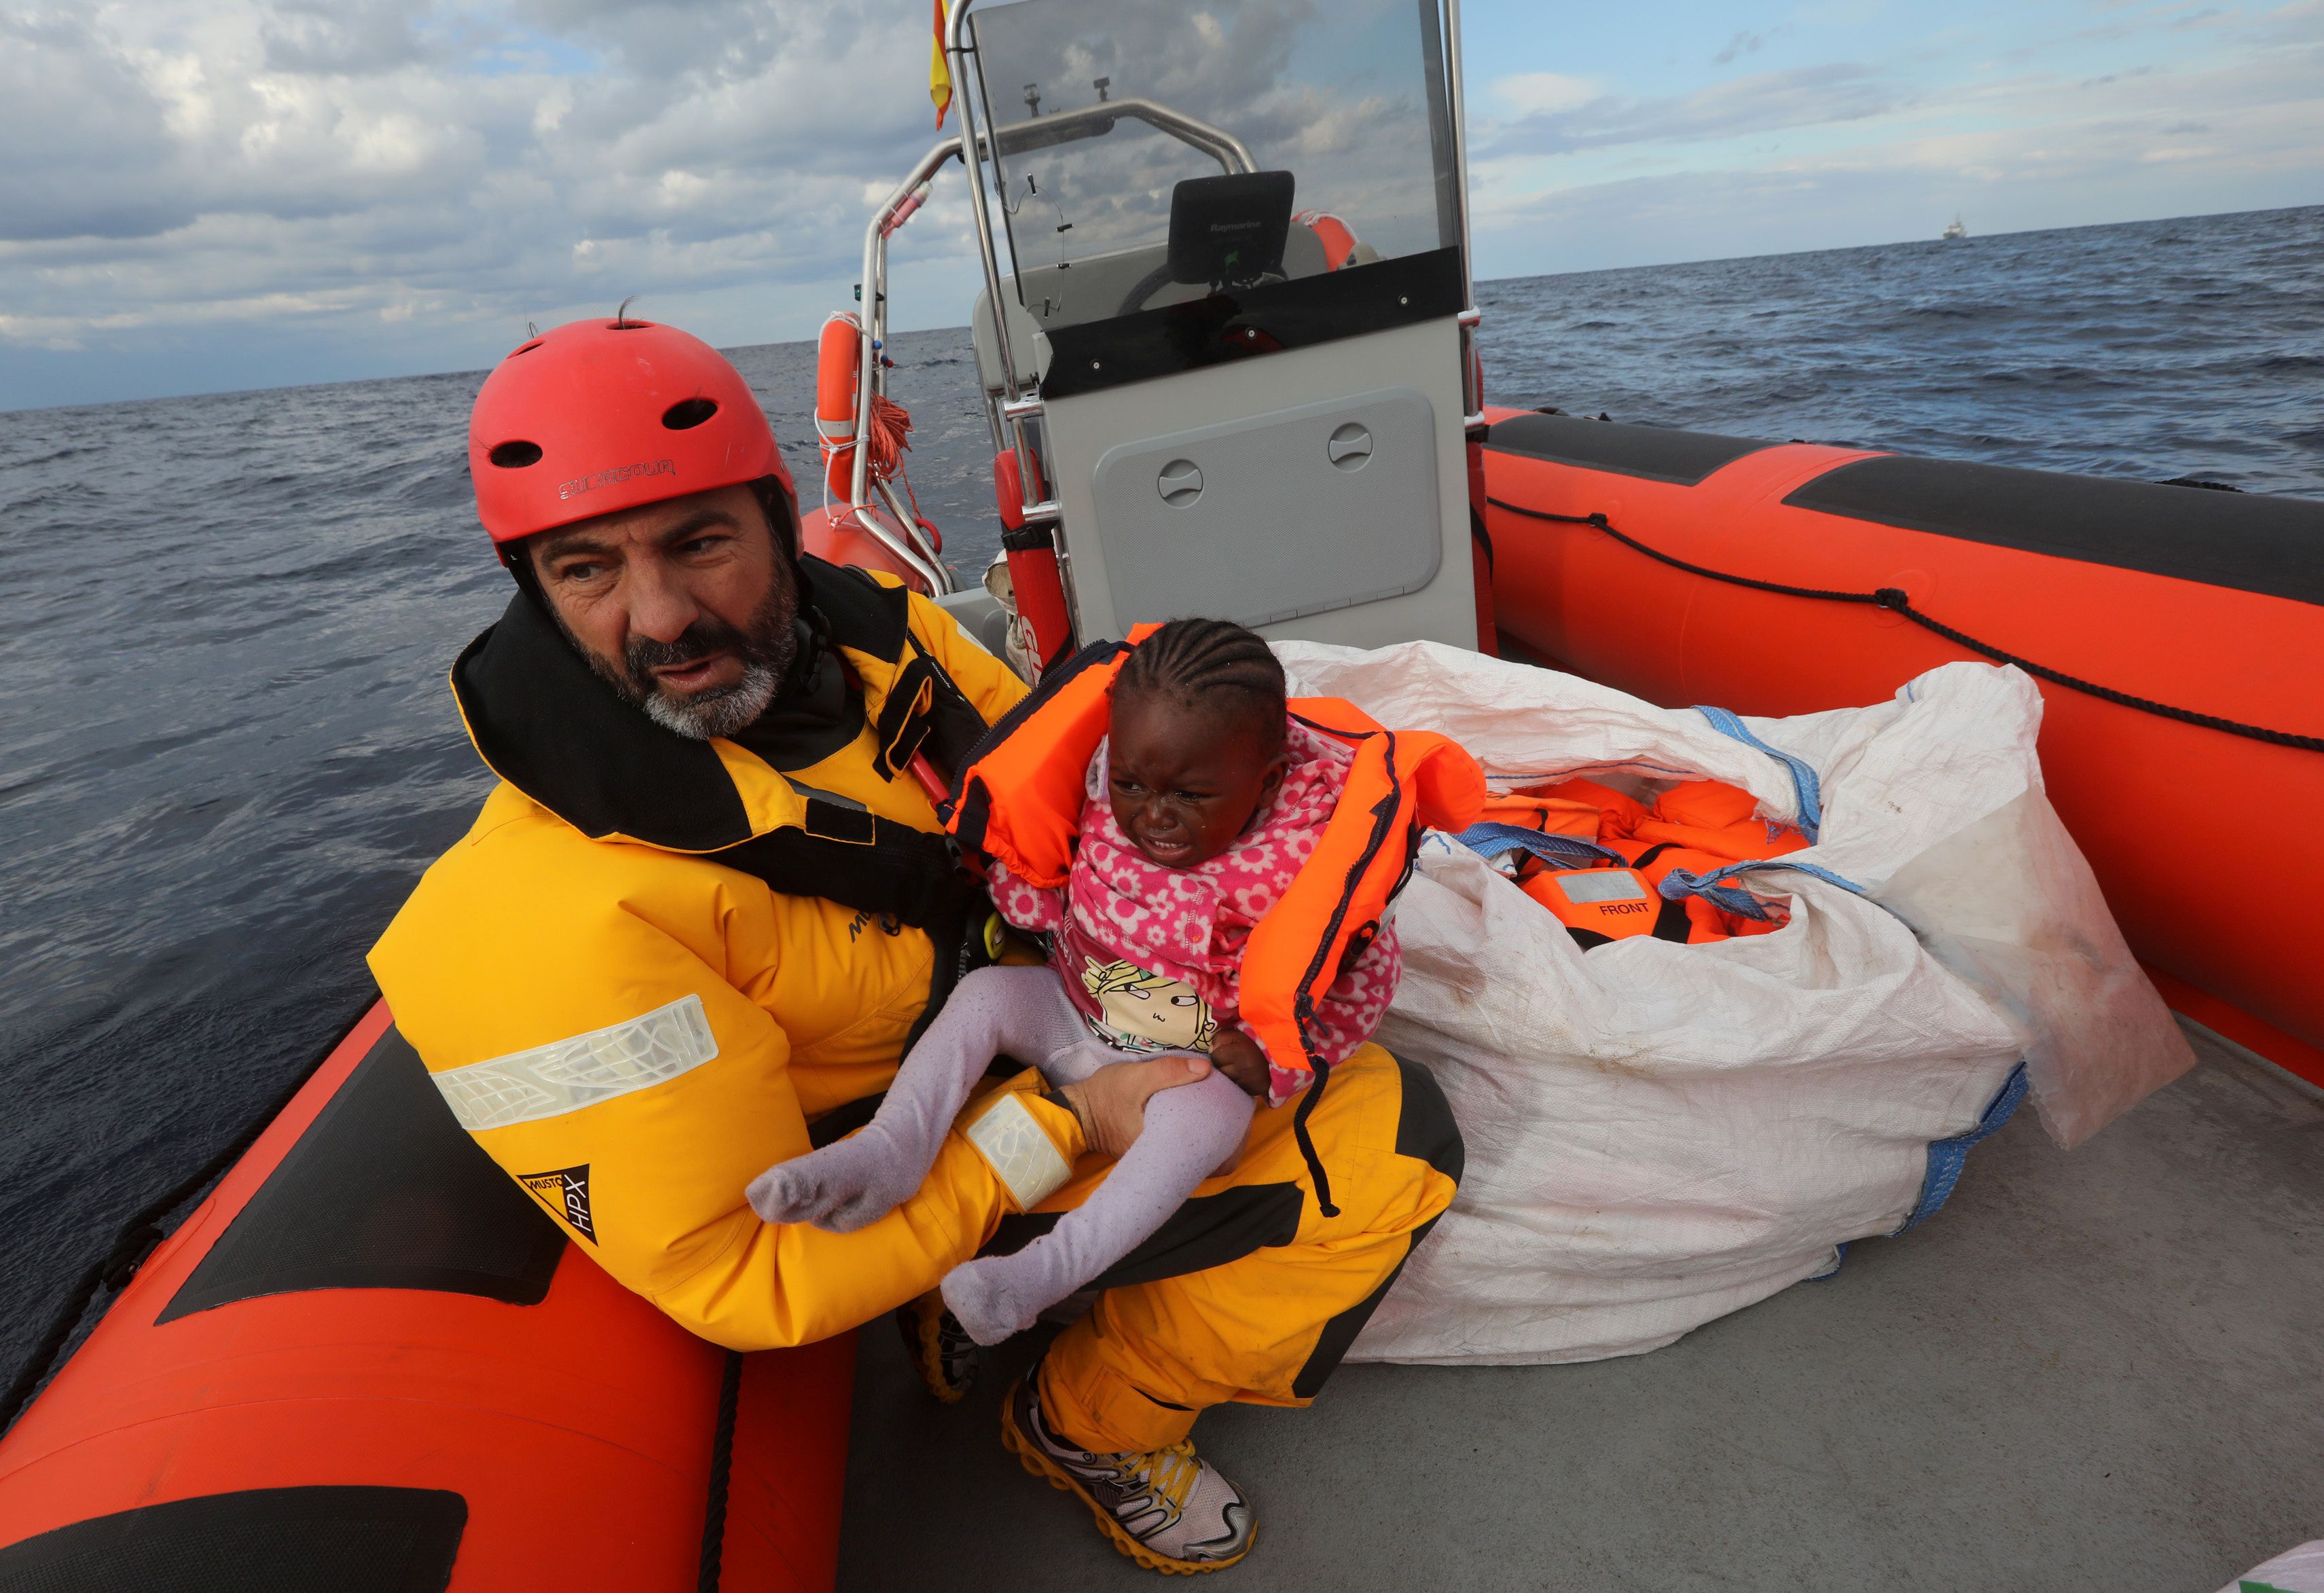 Oscar Camps, founder of Spanish NGO Proactiva Open Arms, holds a migrant child inside a rescue craft after pulling it from an overcrowded raft